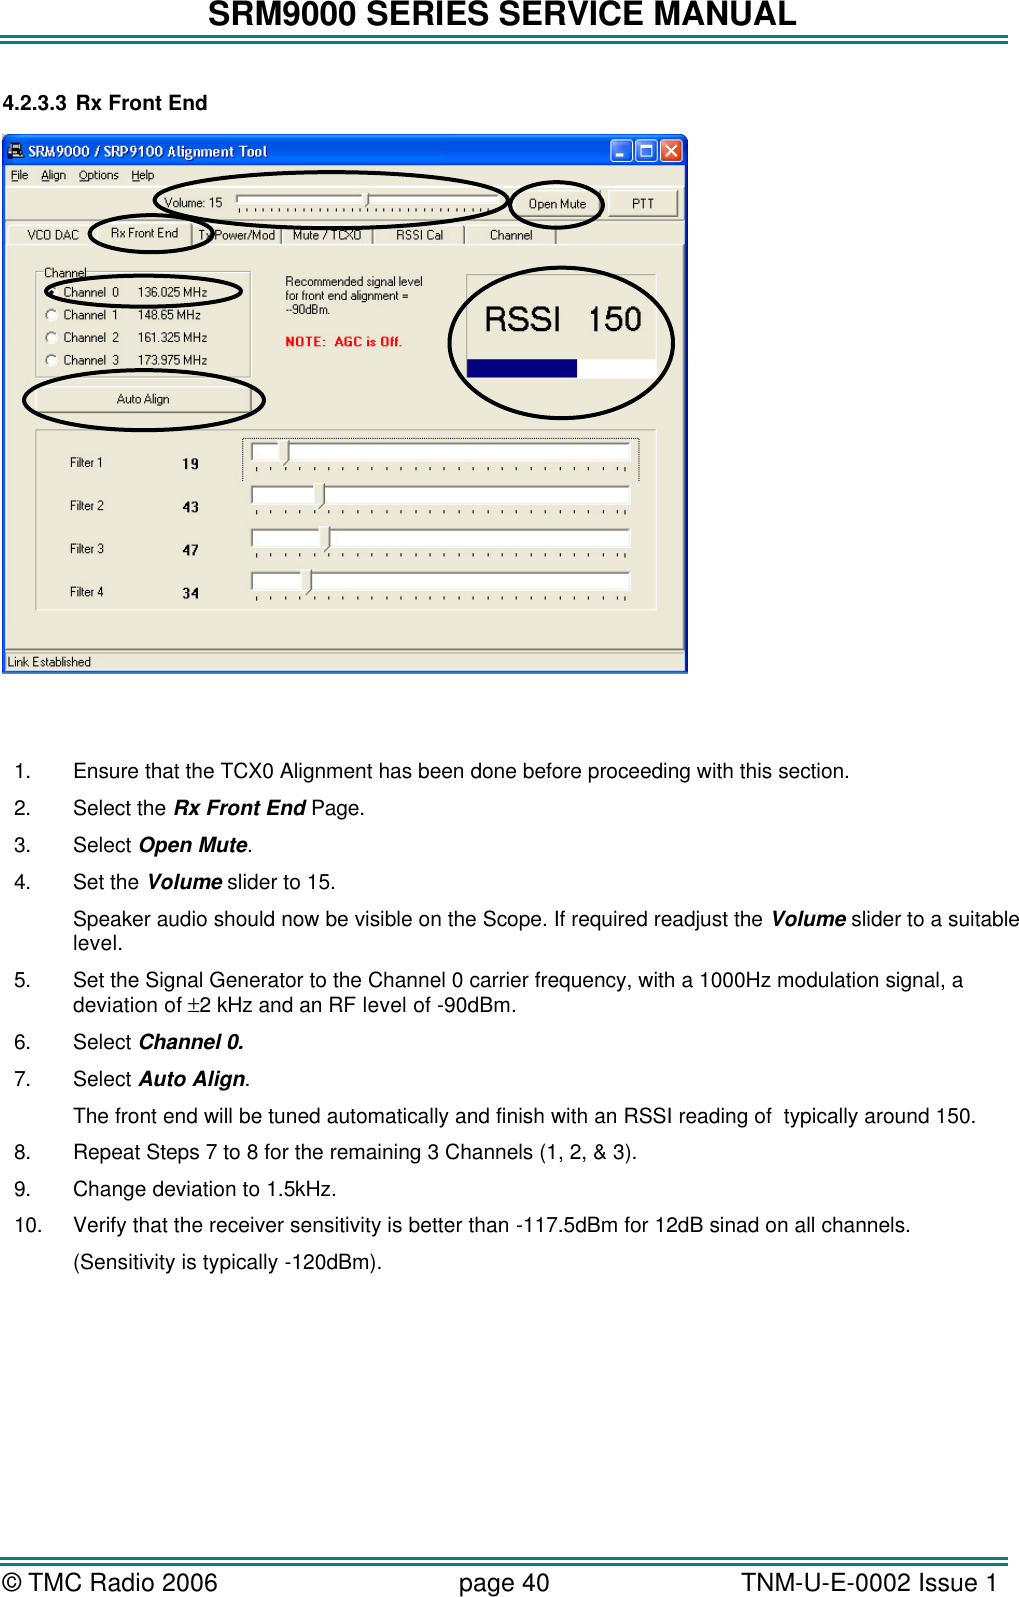 SRM9000 SERIES SERVICE MANUAL © TMC Radio 2006 page 40   TNM-U-E-0002 Issue 1  4.2.3.3 Rx Front End      1. Ensure that the TCX0 Alignment has been done before proceeding with this section. 2. Select the Rx Front End Page. 3. Select Open Mute. 4. Set the Volume slider to 15.  Speaker audio should now be visible on the Scope. If required readjust the Volume slider to a suitable level. 5. Set the Signal Generator to the Channel 0 carrier frequency, with a 1000Hz modulation signal, a deviation of ±2 kHz and an RF level of -90dBm. 6. Select Channel 0. 7. Select Auto Align. The front end will be tuned automatically and finish with an RSSI reading of  typically around 150. 8. Repeat Steps 7 to 8 for the remaining 3 Channels (1, 2, &amp; 3). 9. Change deviation to 1.5kHz. 10. Verify that the receiver sensitivity is better than -117.5dBm for 12dB sinad on all channels.  (Sensitivity is typically -120dBm).  